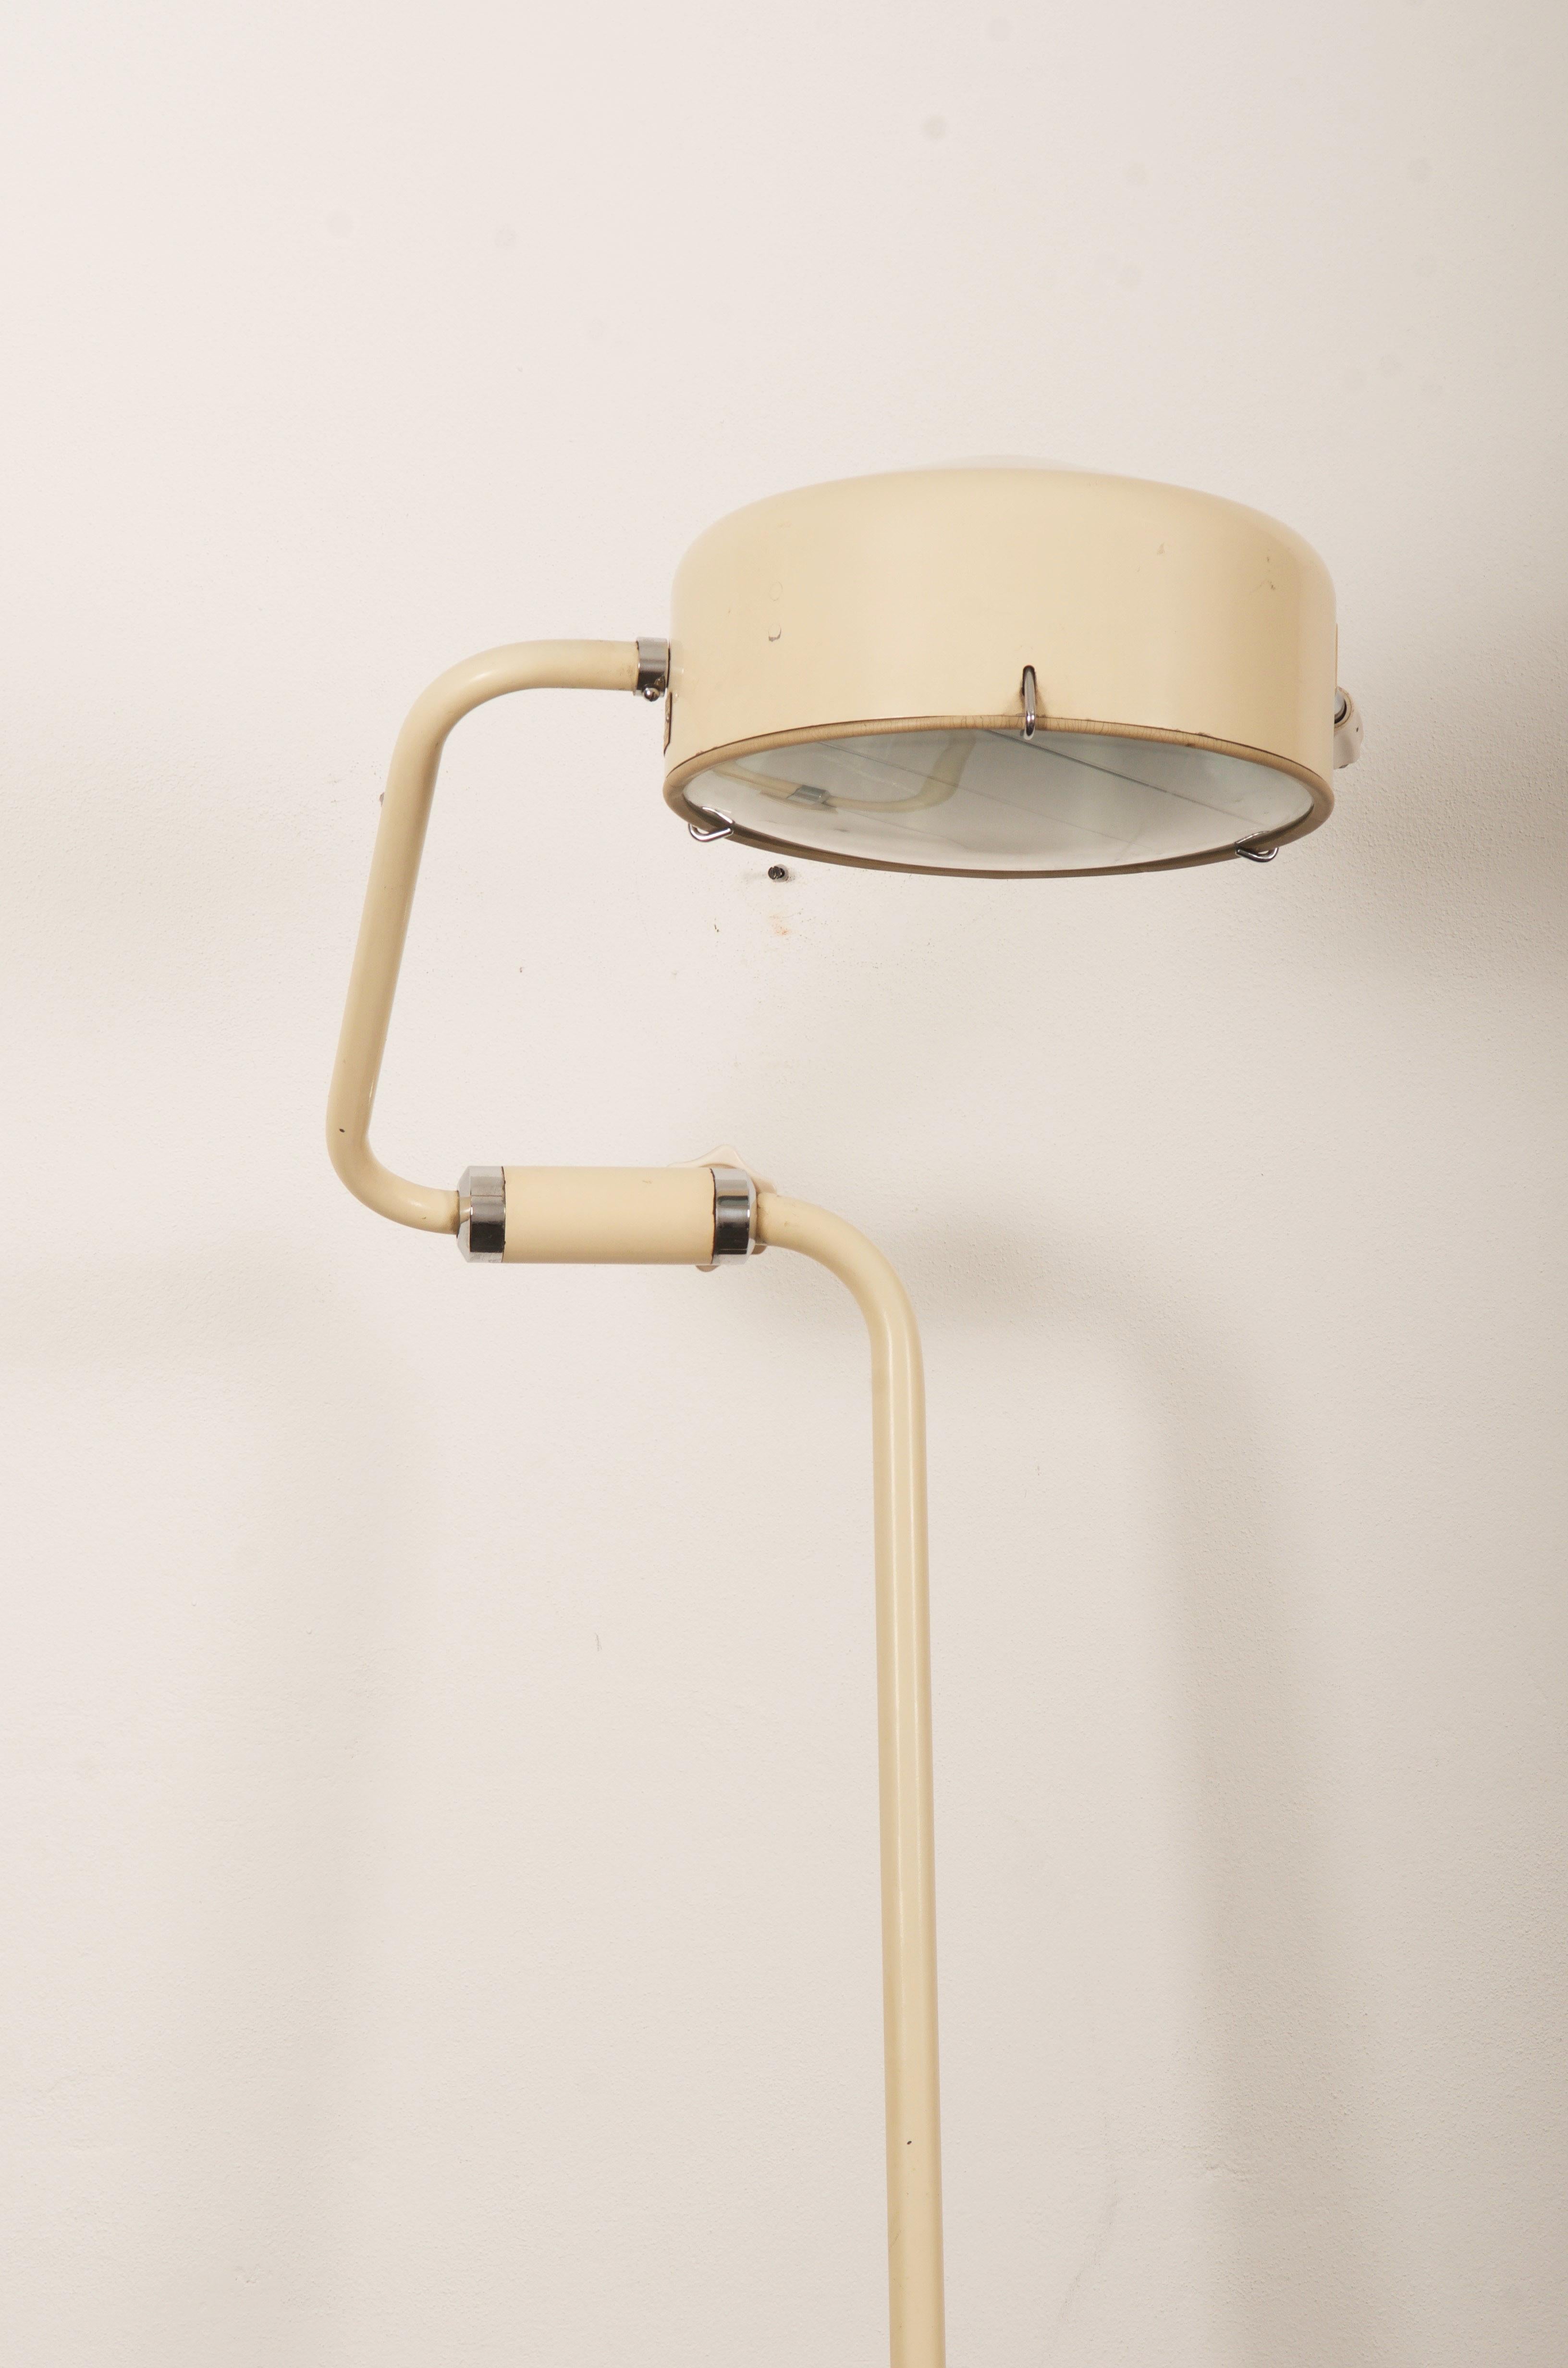 Midcentury Adjustable Industrial Medical Floor Lamp In Good Condition For Sale In Vienna, AT